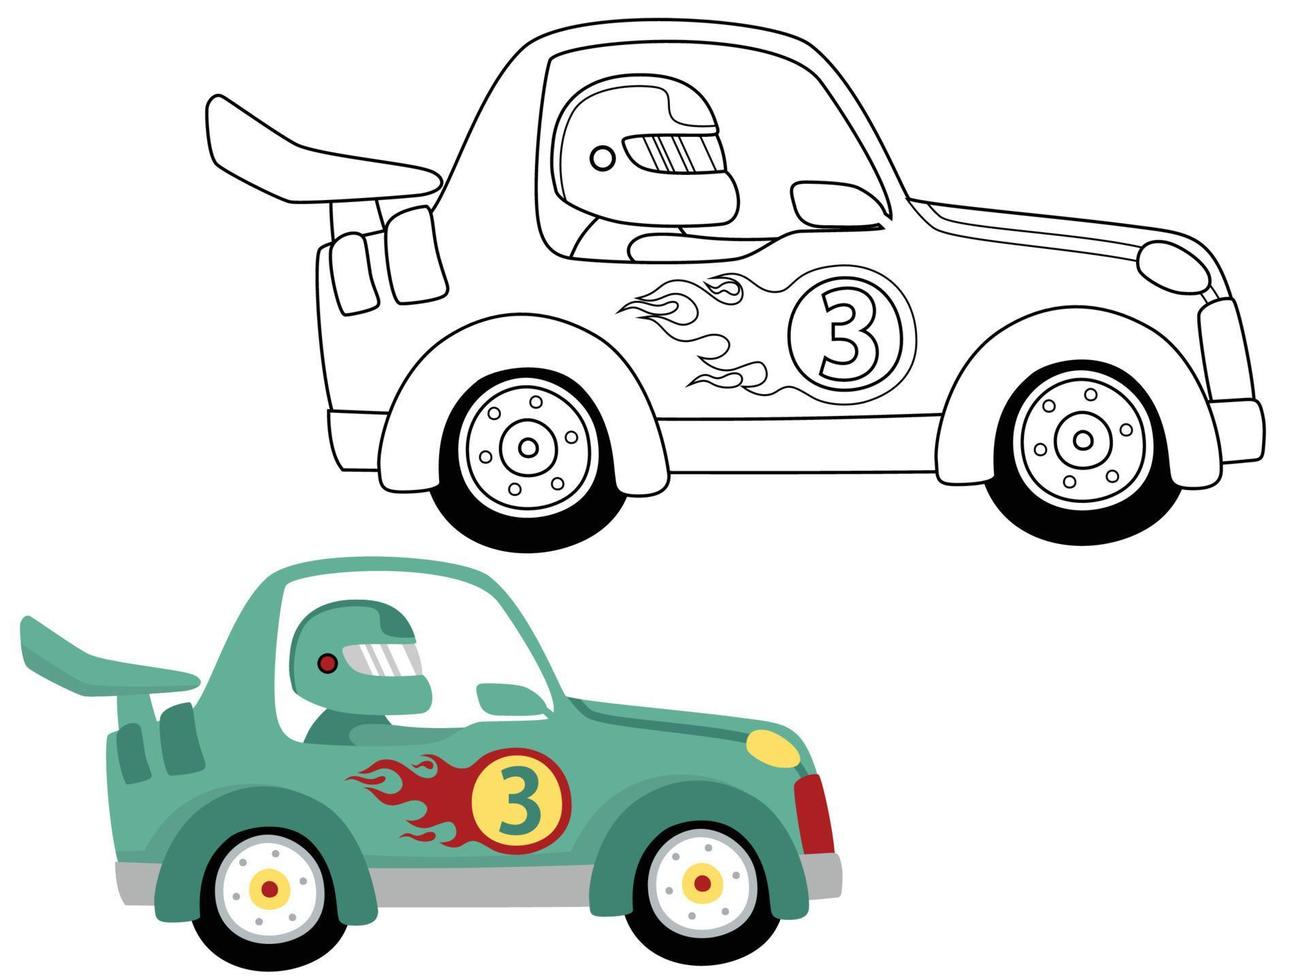 Race car cartoon illustration, coloring book or page 15645488 Vector Art at  Vecteezy